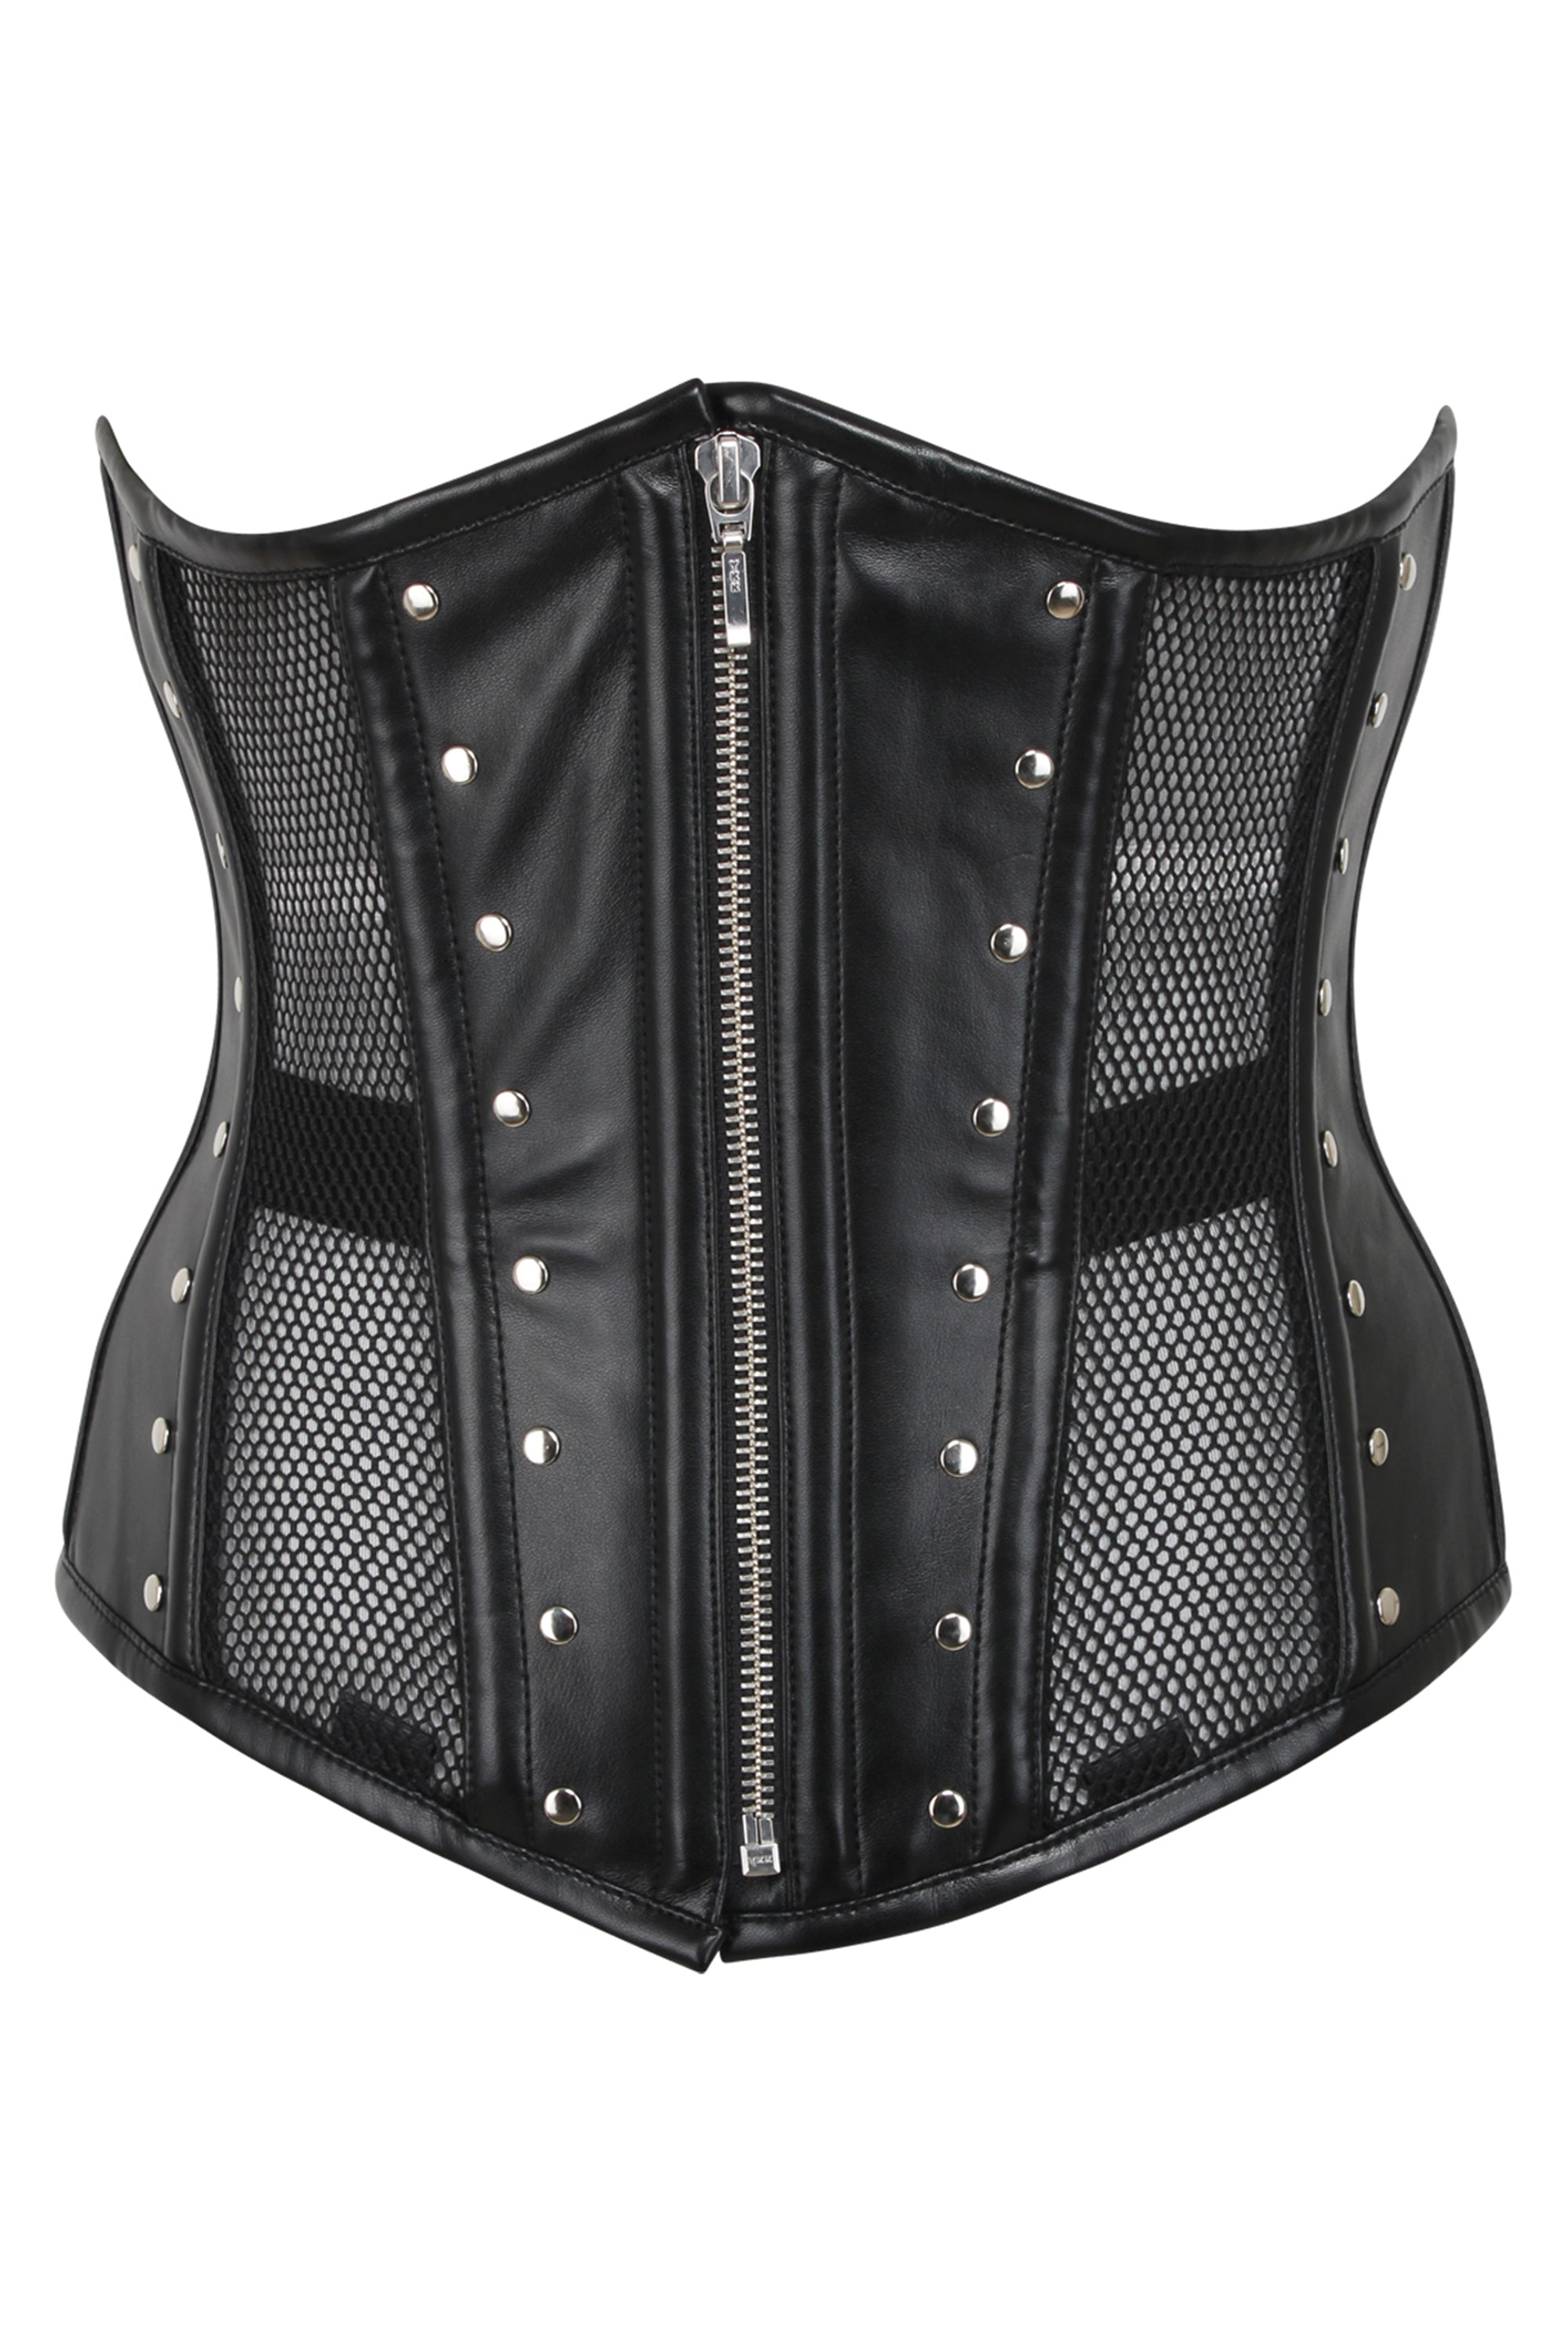 Black Sweetheart Corset with Removable Bra Straps, Zipper Front, Laced Back